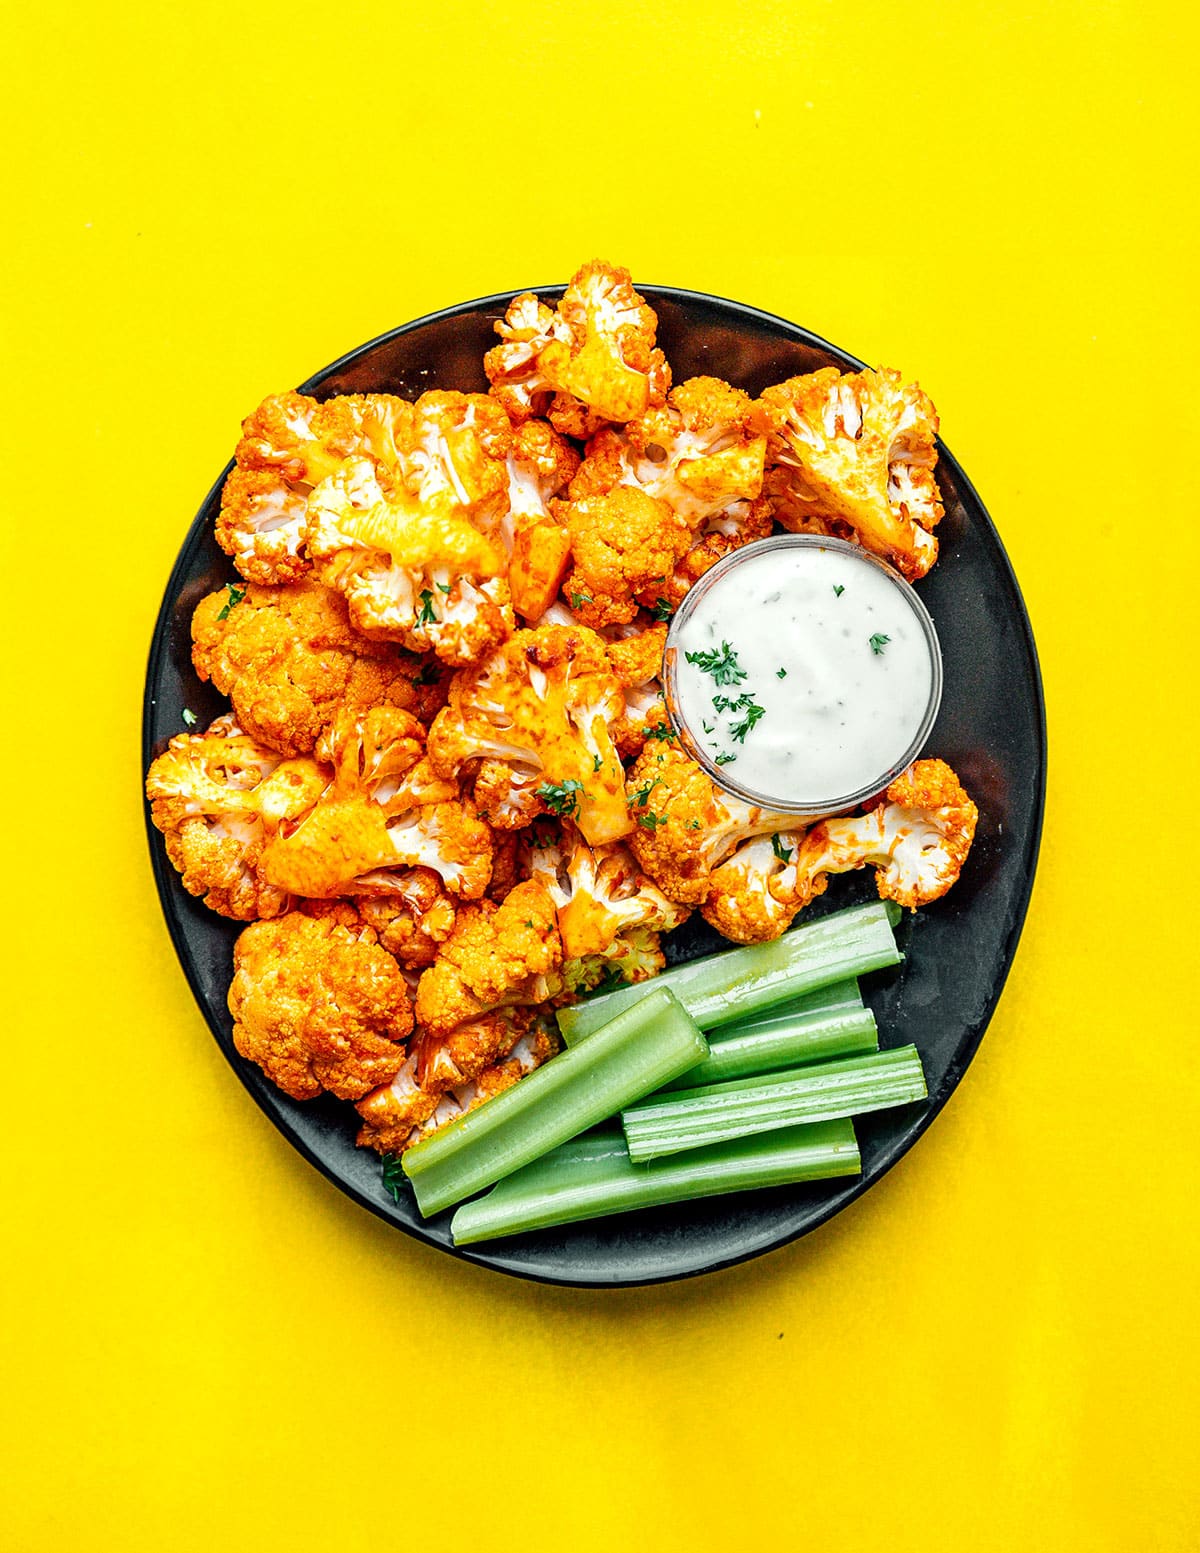 This Air Fryer Buffalo Cauliflower is an easy, vegan recipe that requires just 20 minutes to make and is complete with your favorite creamy dip!